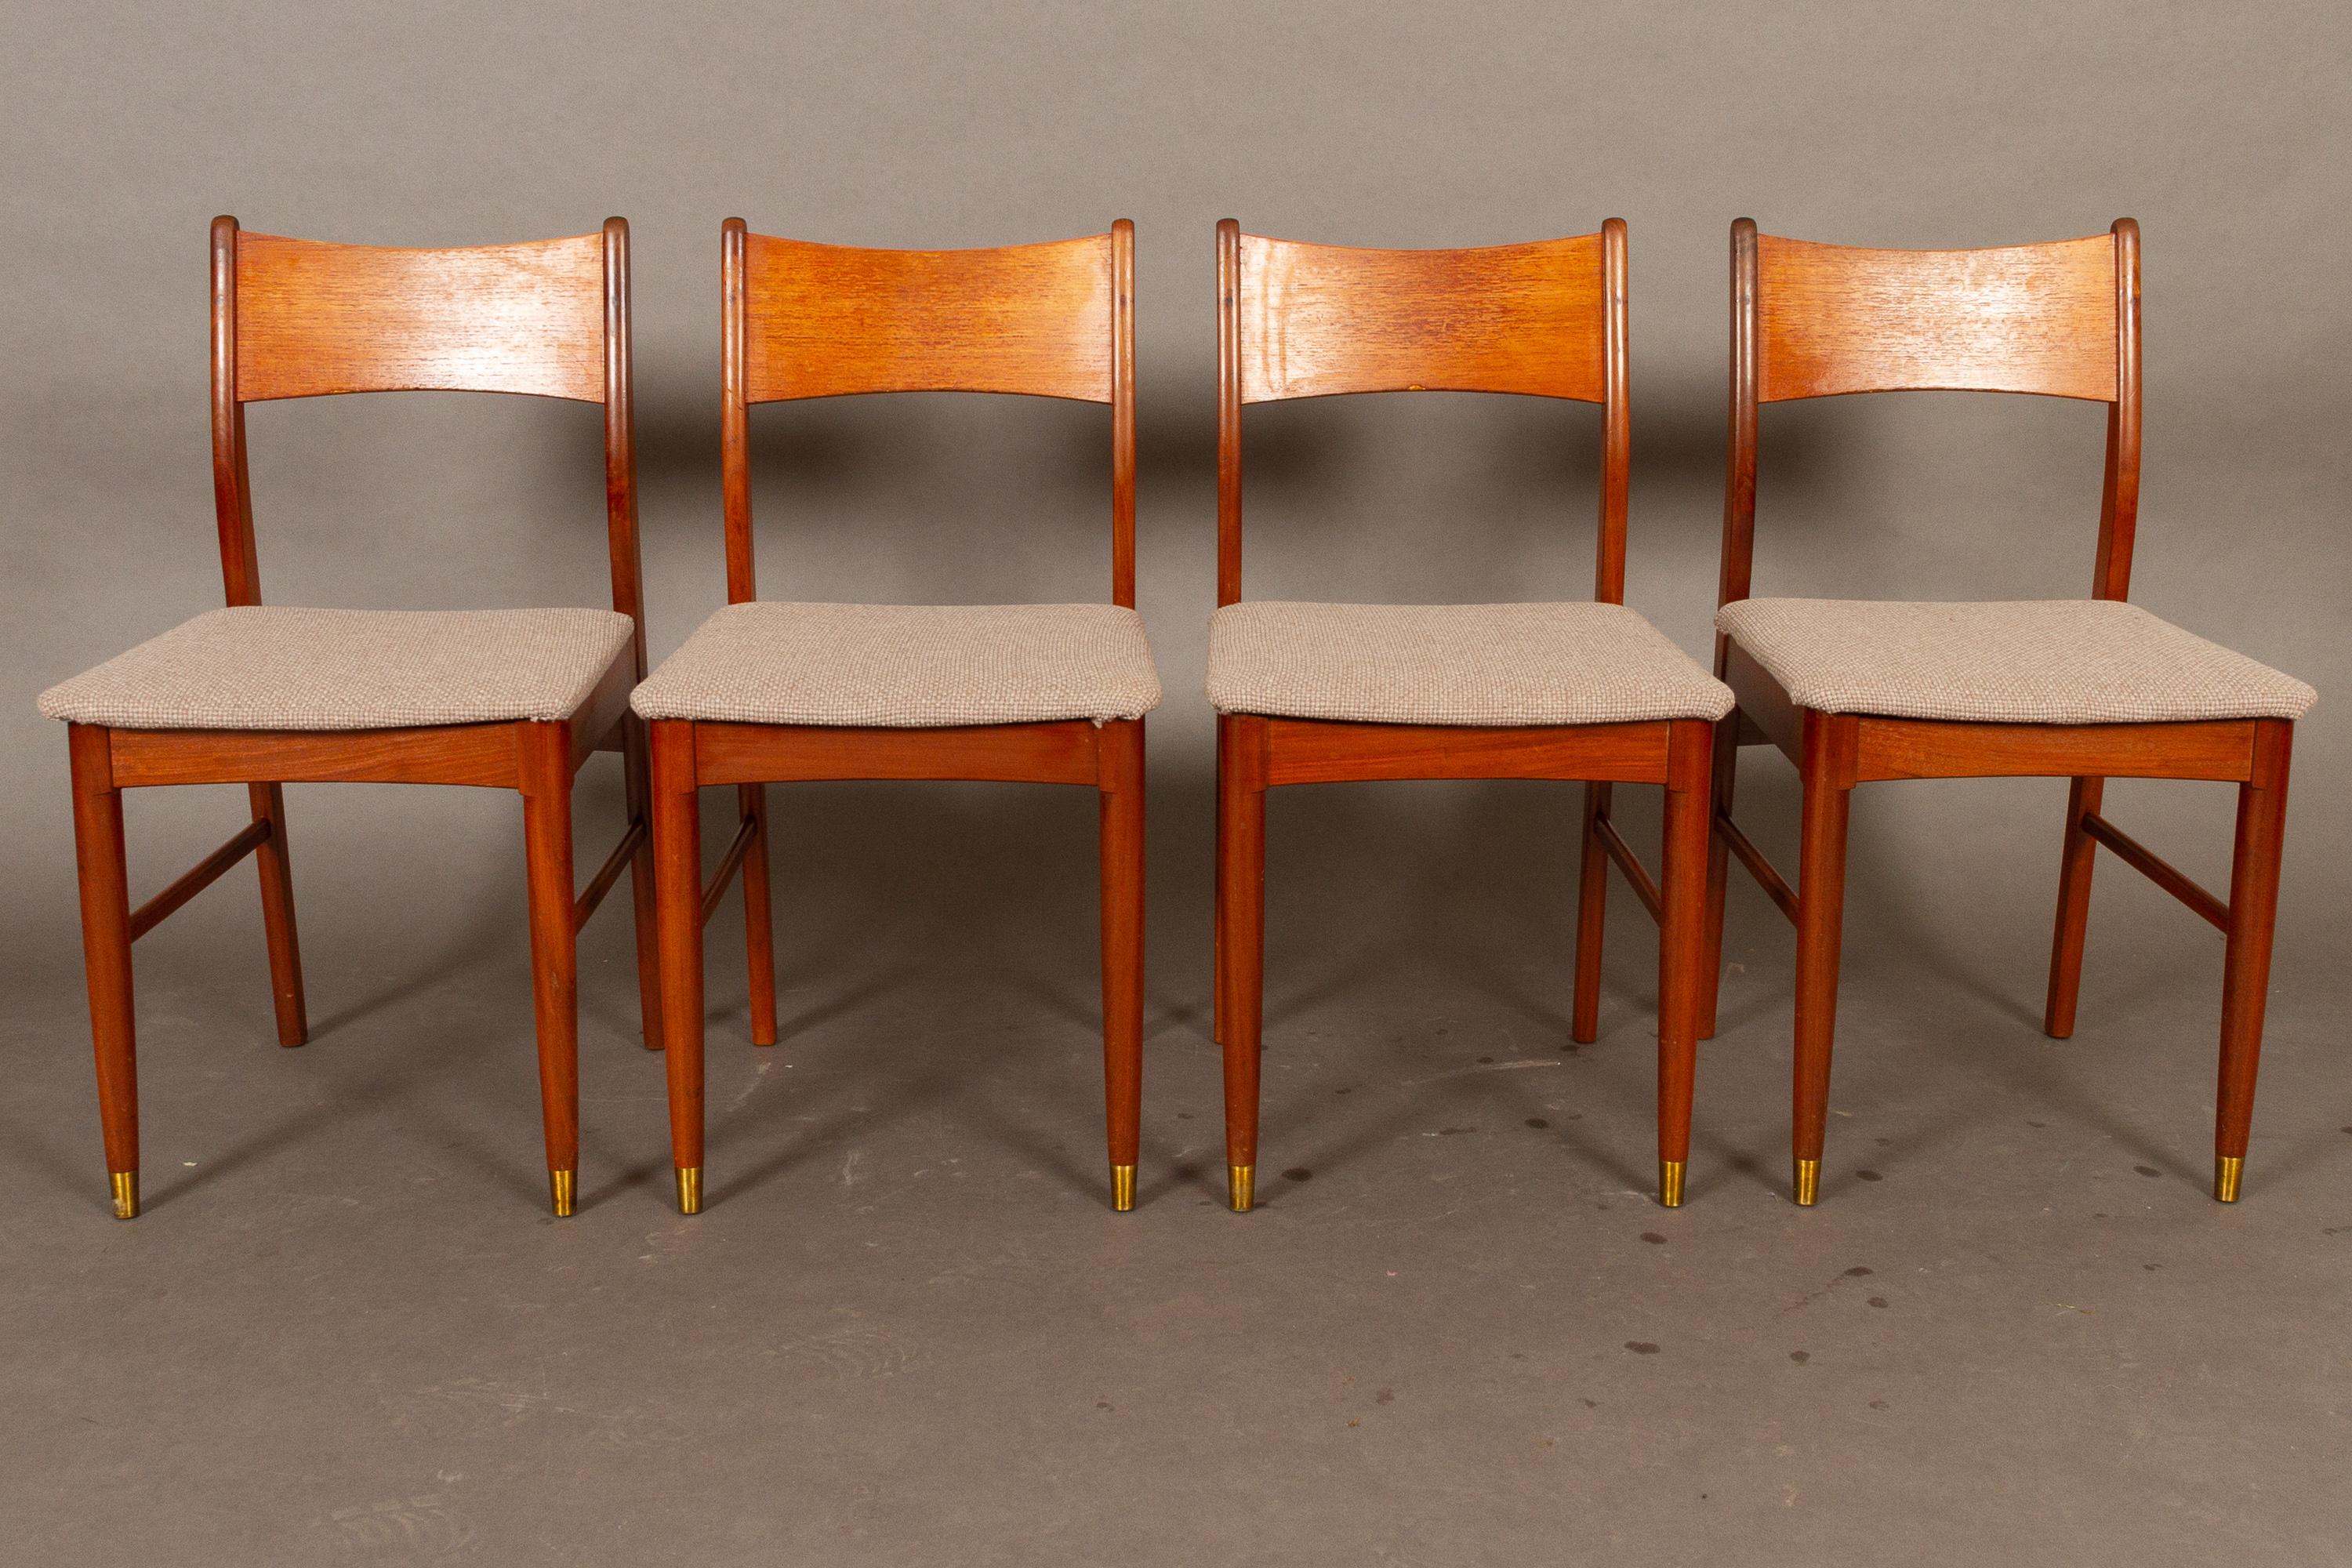 Vintage Danish teak dining chairs 1950s set of 4
Set of four elegant Danish Mid-Century Modern dining chair with solid teak frame and backrests in teak veneer. Legs are rounded and front legs have round brass shoes. Seats are upholstered with grey